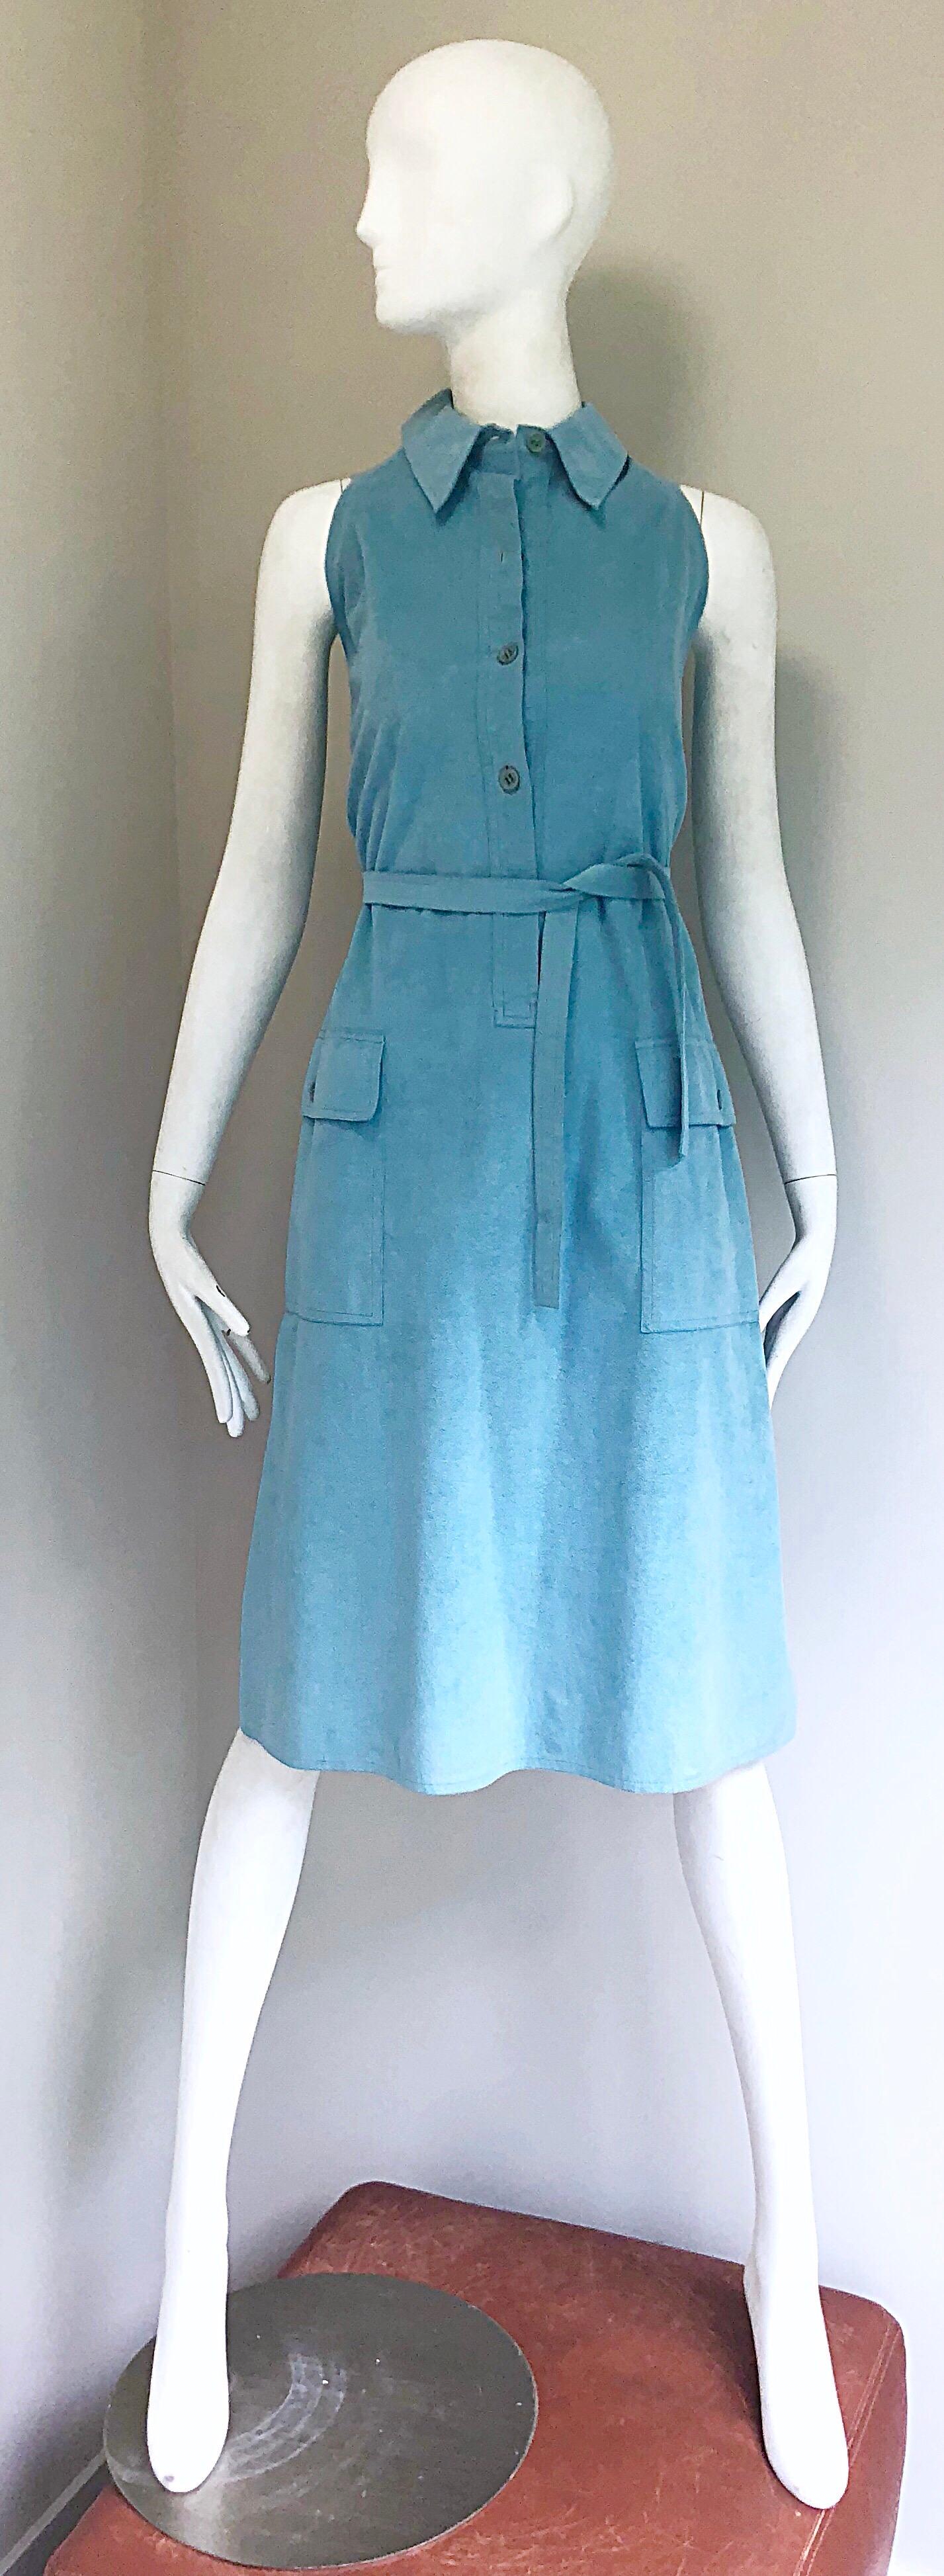 Chic iconic early 1970s HALSTON for MONTALDO'S Ultrasuede Robin Egg blue sleeveless belted shirt dress! This beauty is particularly rare, as it hails from Halston's debut line of ultra suede in 1972. Buttons up the front all the way to the collar.